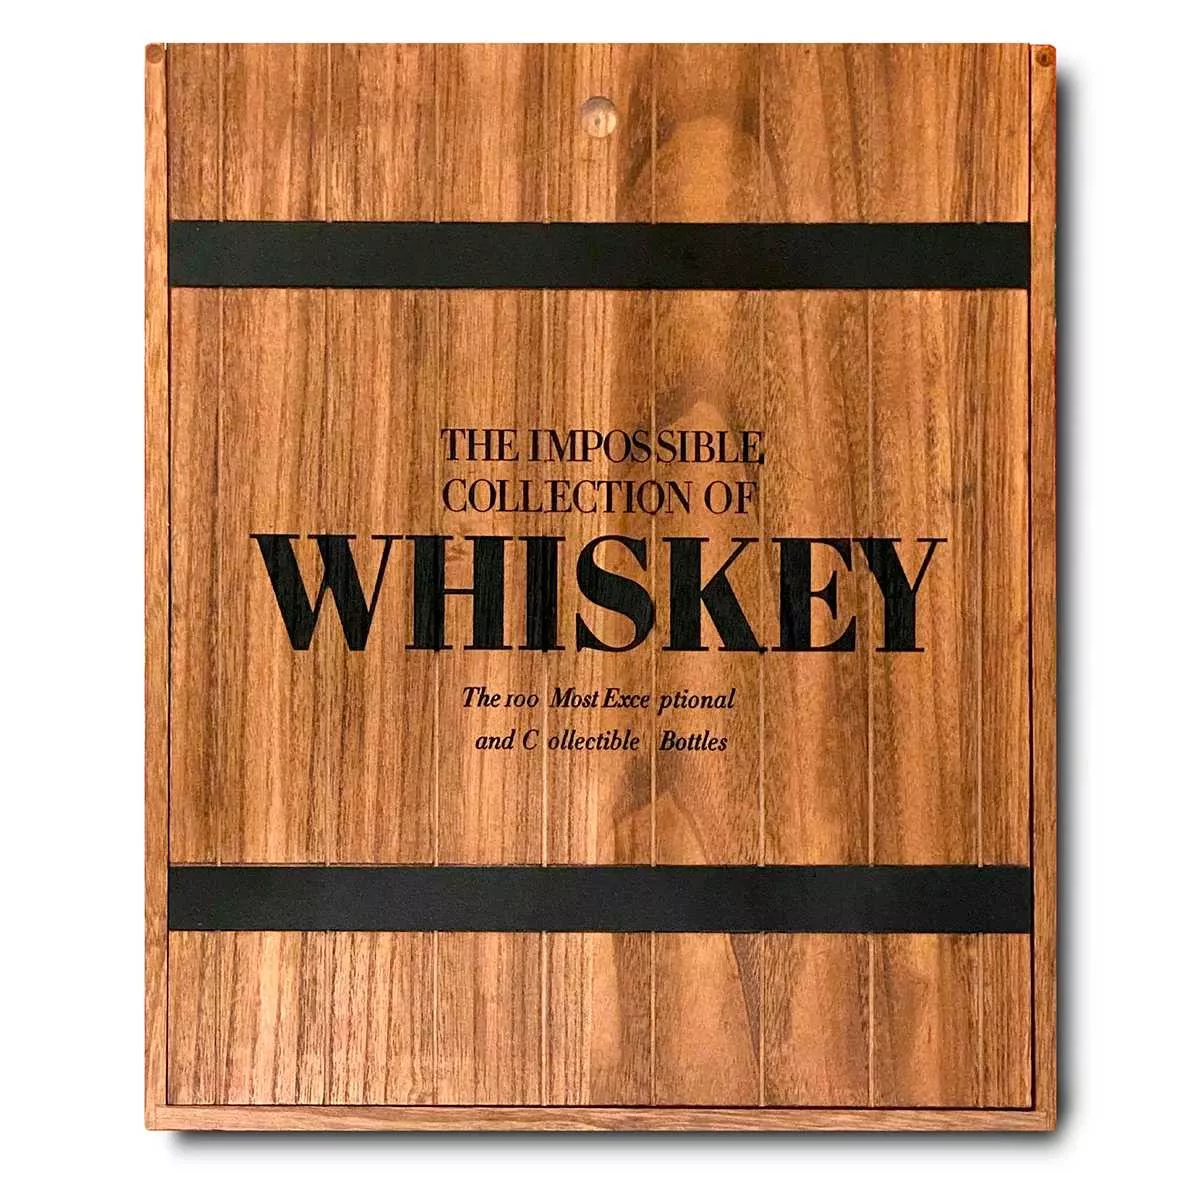 Книга "The Impossible Collection of Whiskey" Assouline Collection (9781614289487) - Фото nav 1